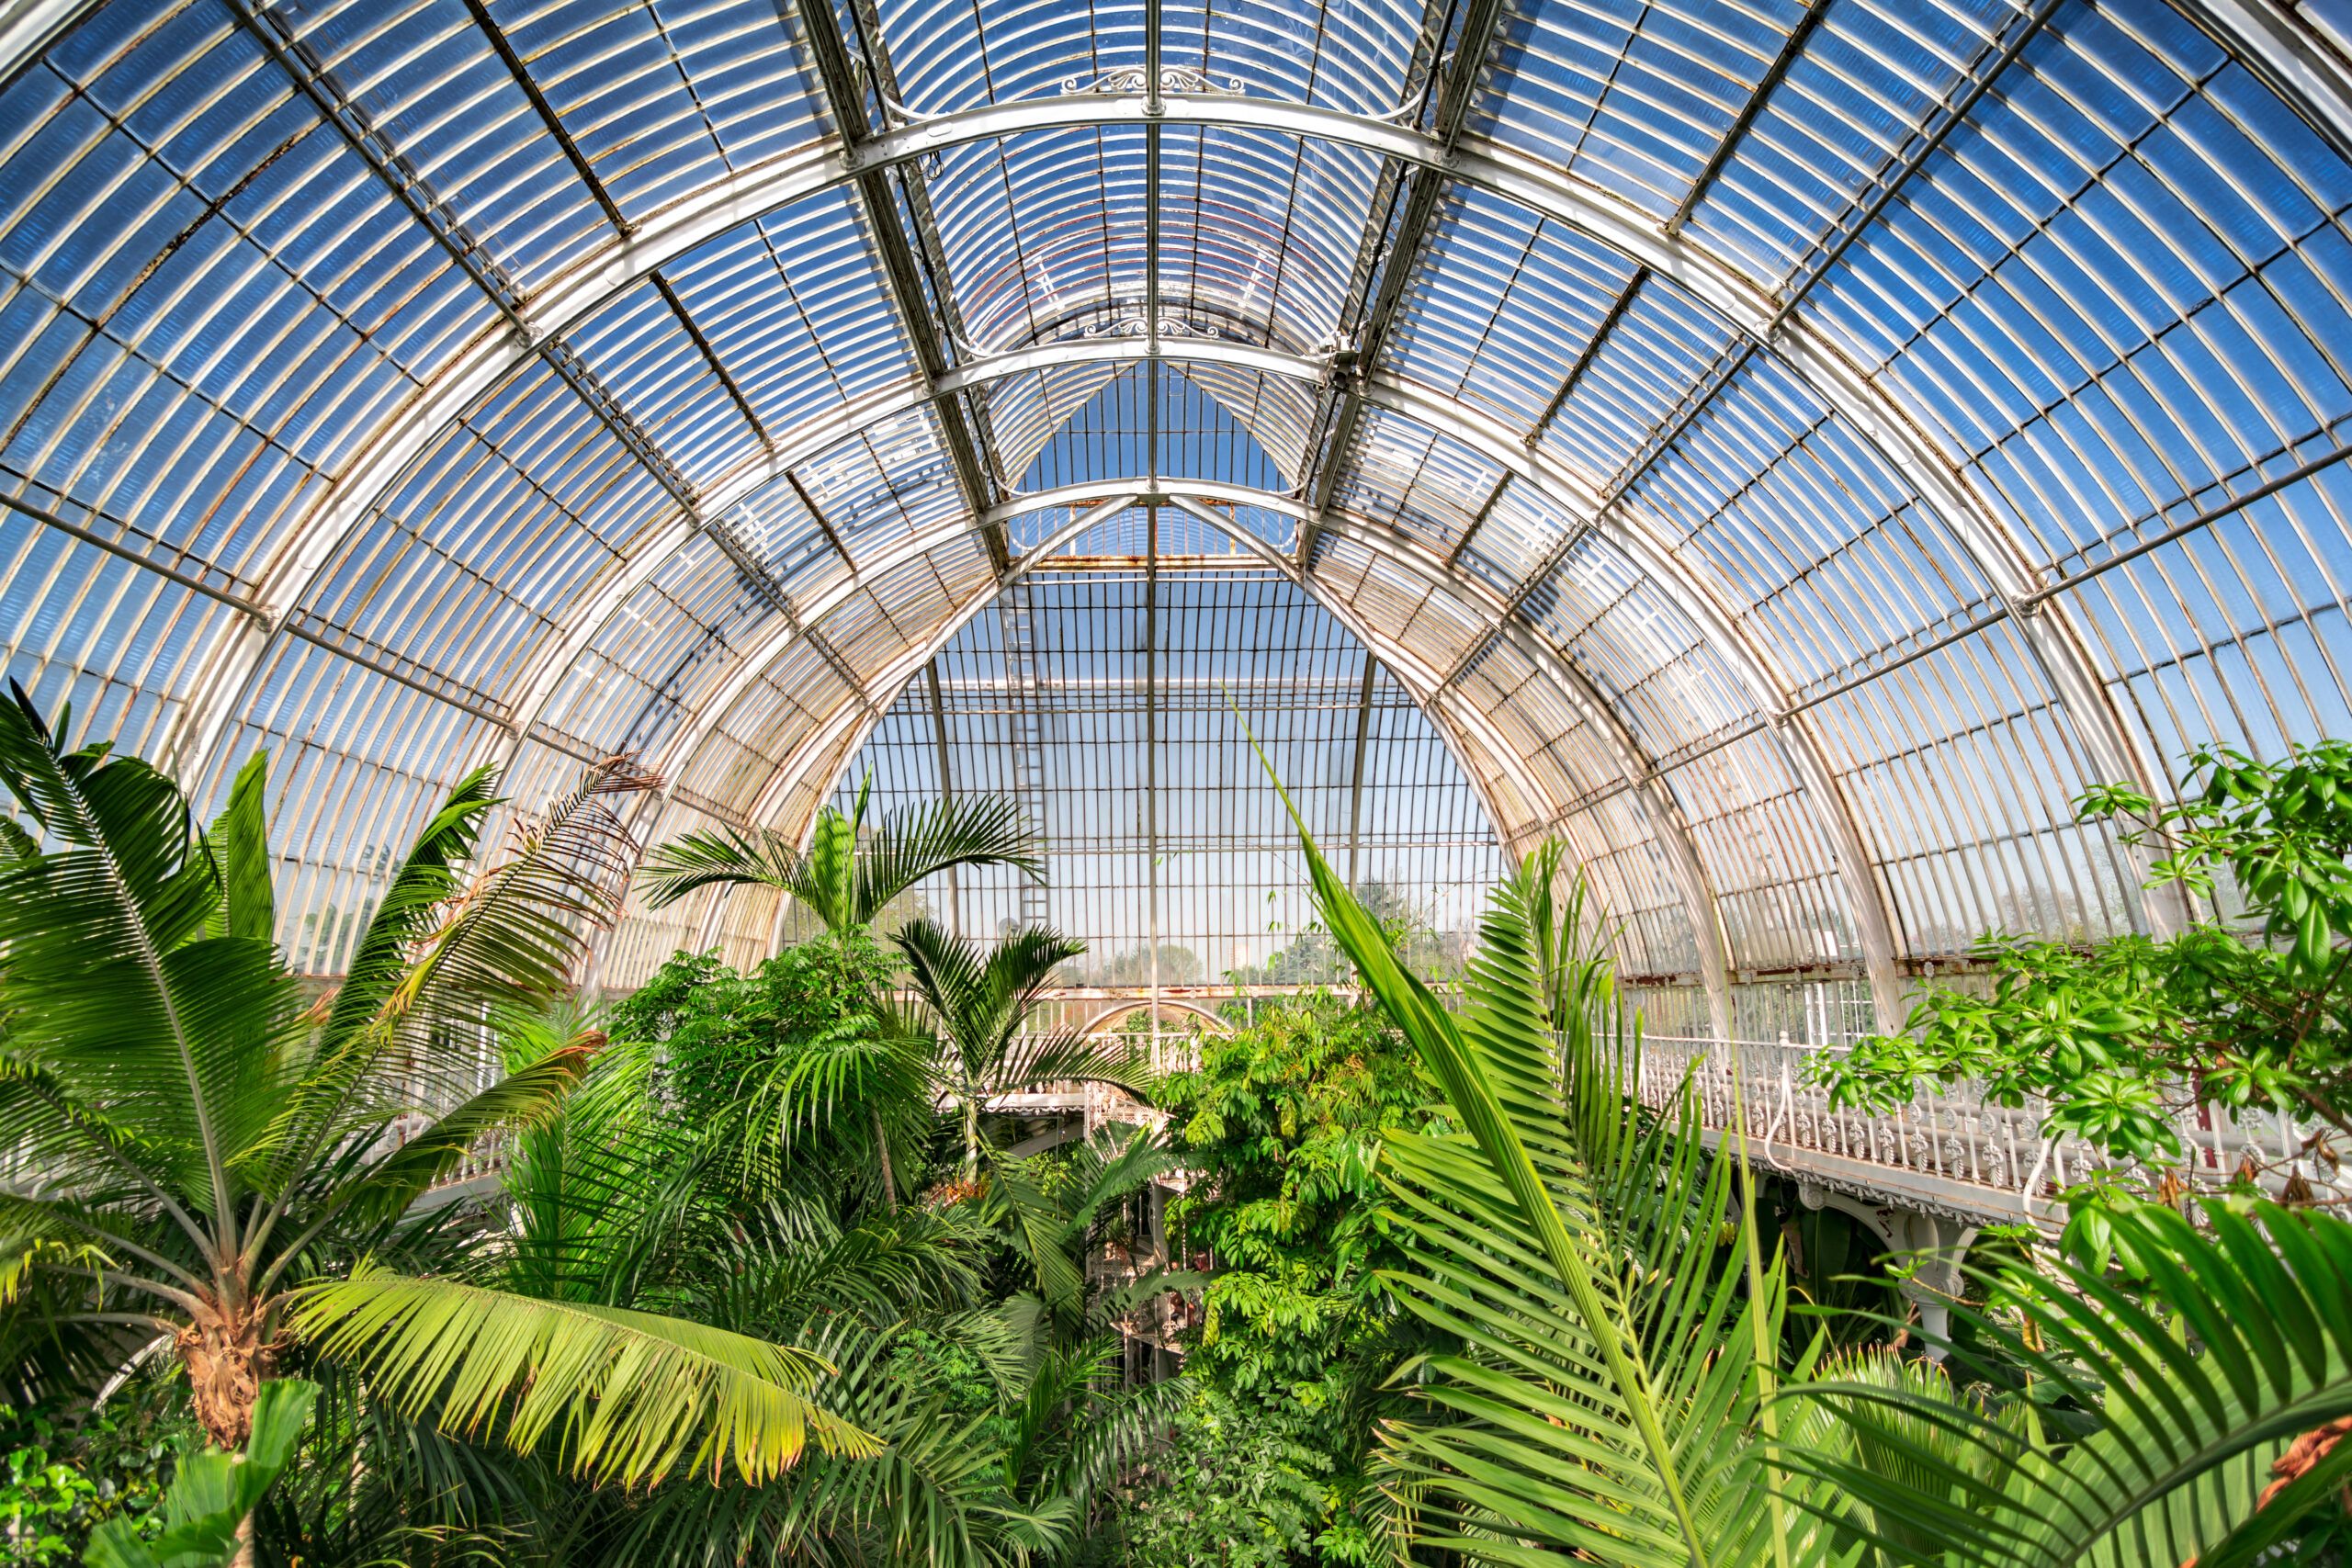 Interior of one of the greenhouses present at Kew Gardens,